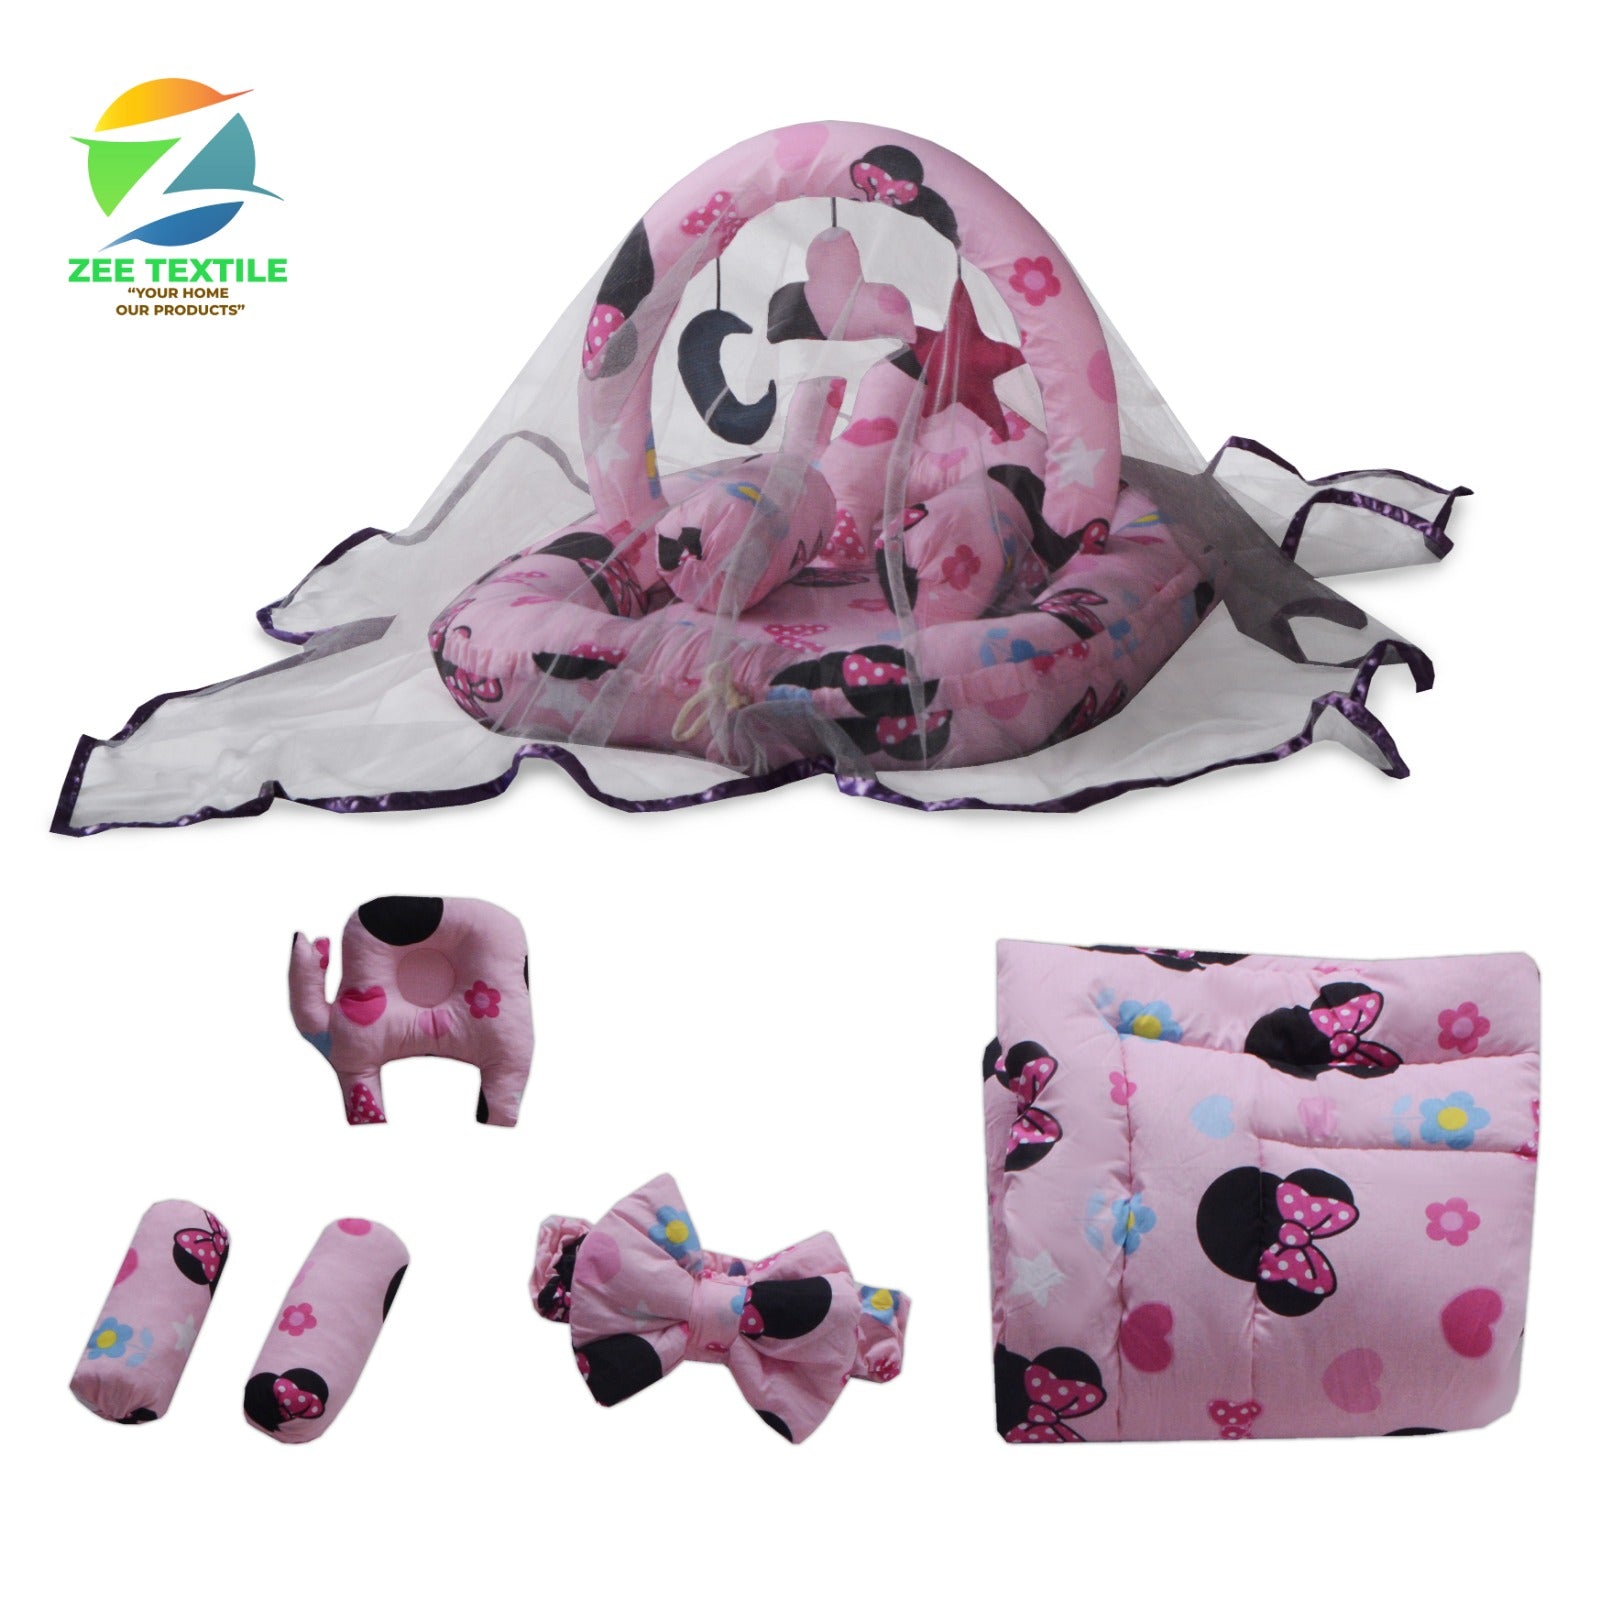 Printed Baby snuggle Set-6 pcs with Mosquito Net-Pink